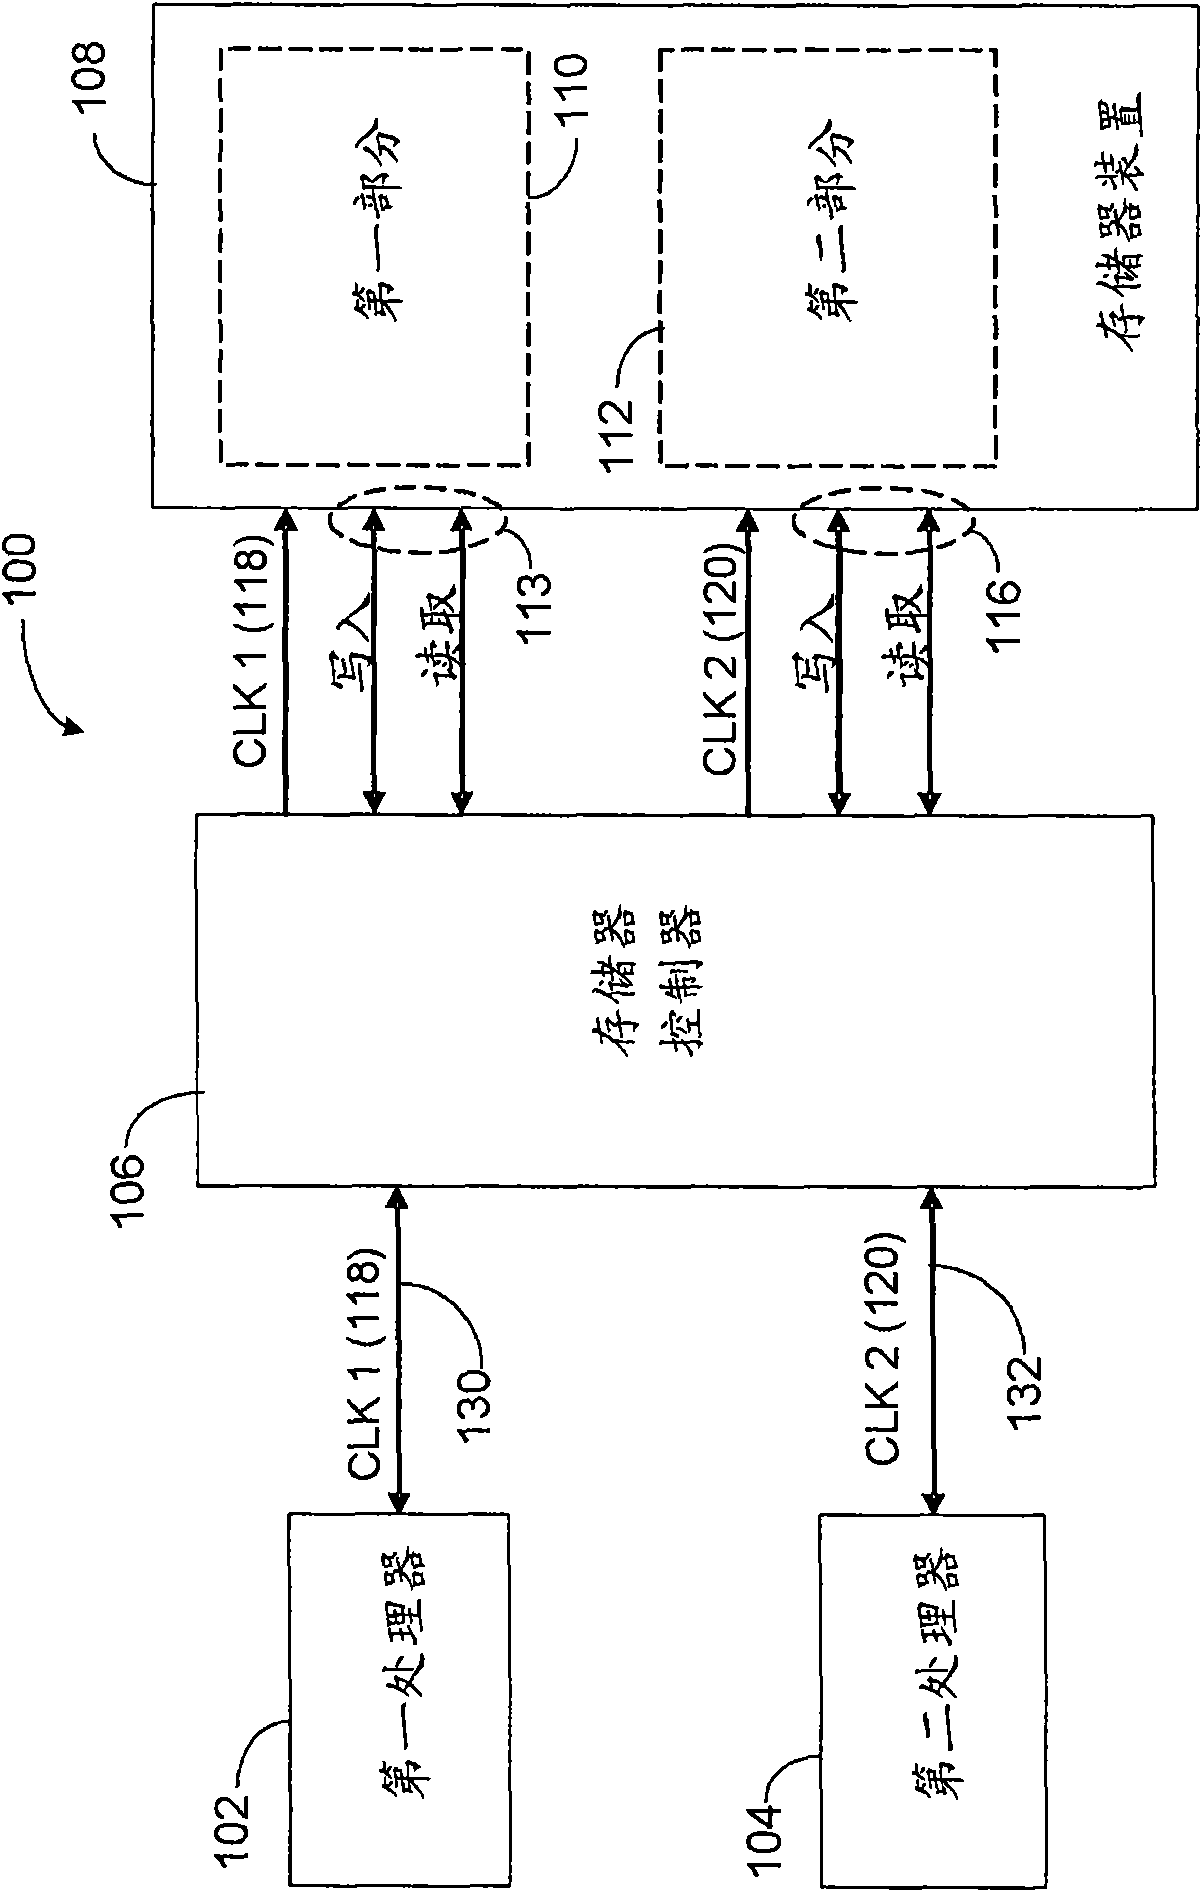 Memory system and memory access method